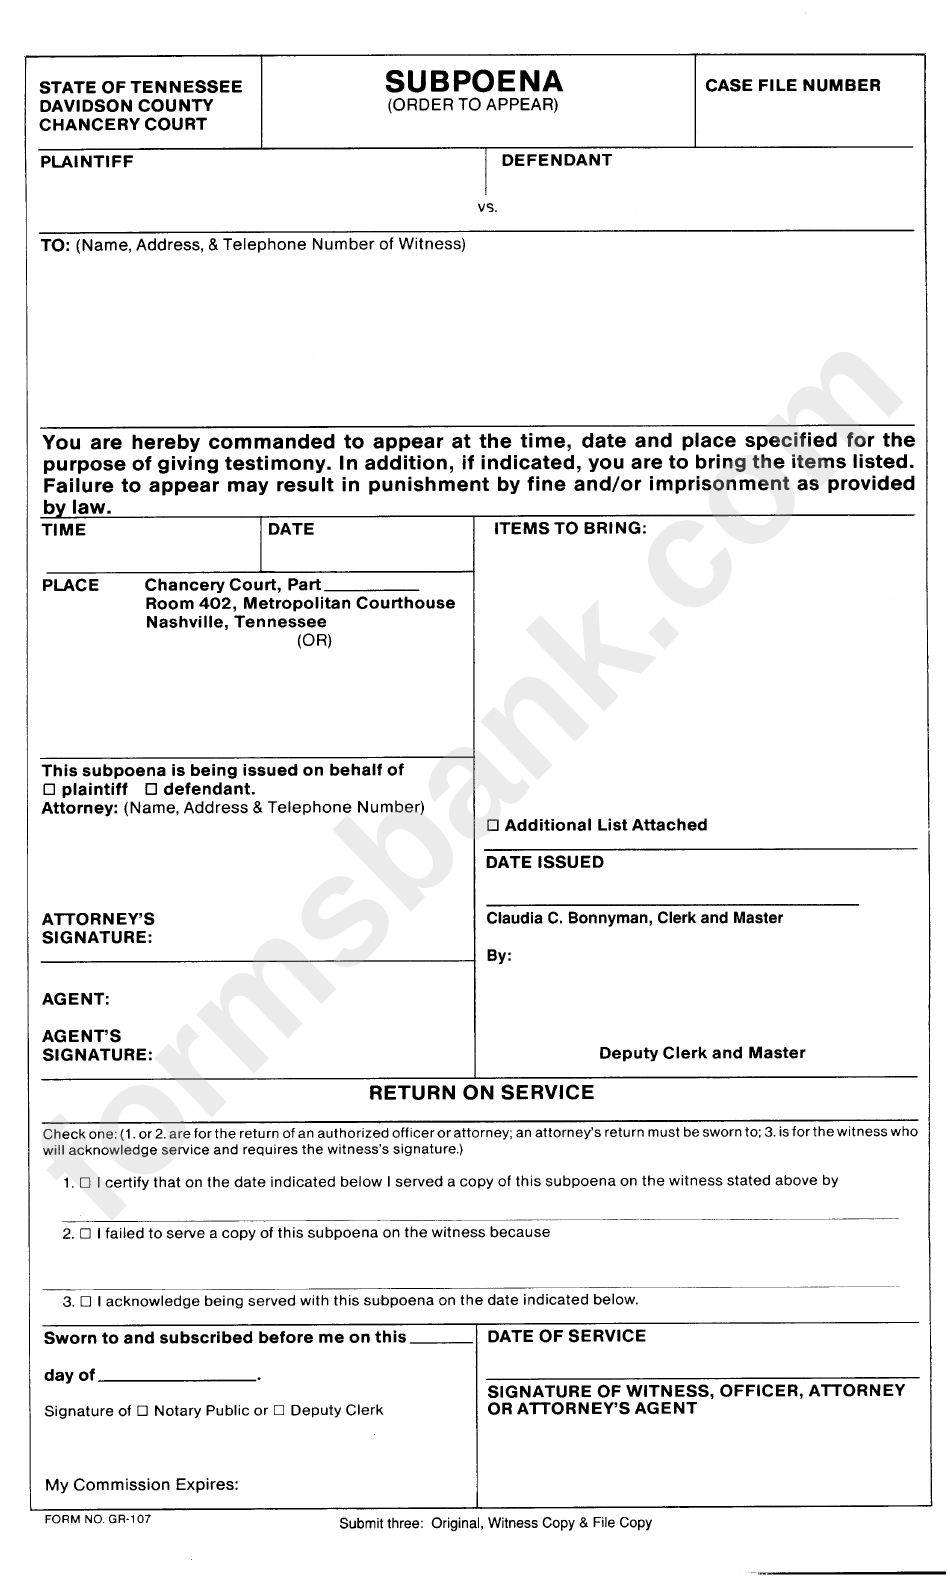 Form Gr-107 - Subpoena - State Of Tennessee